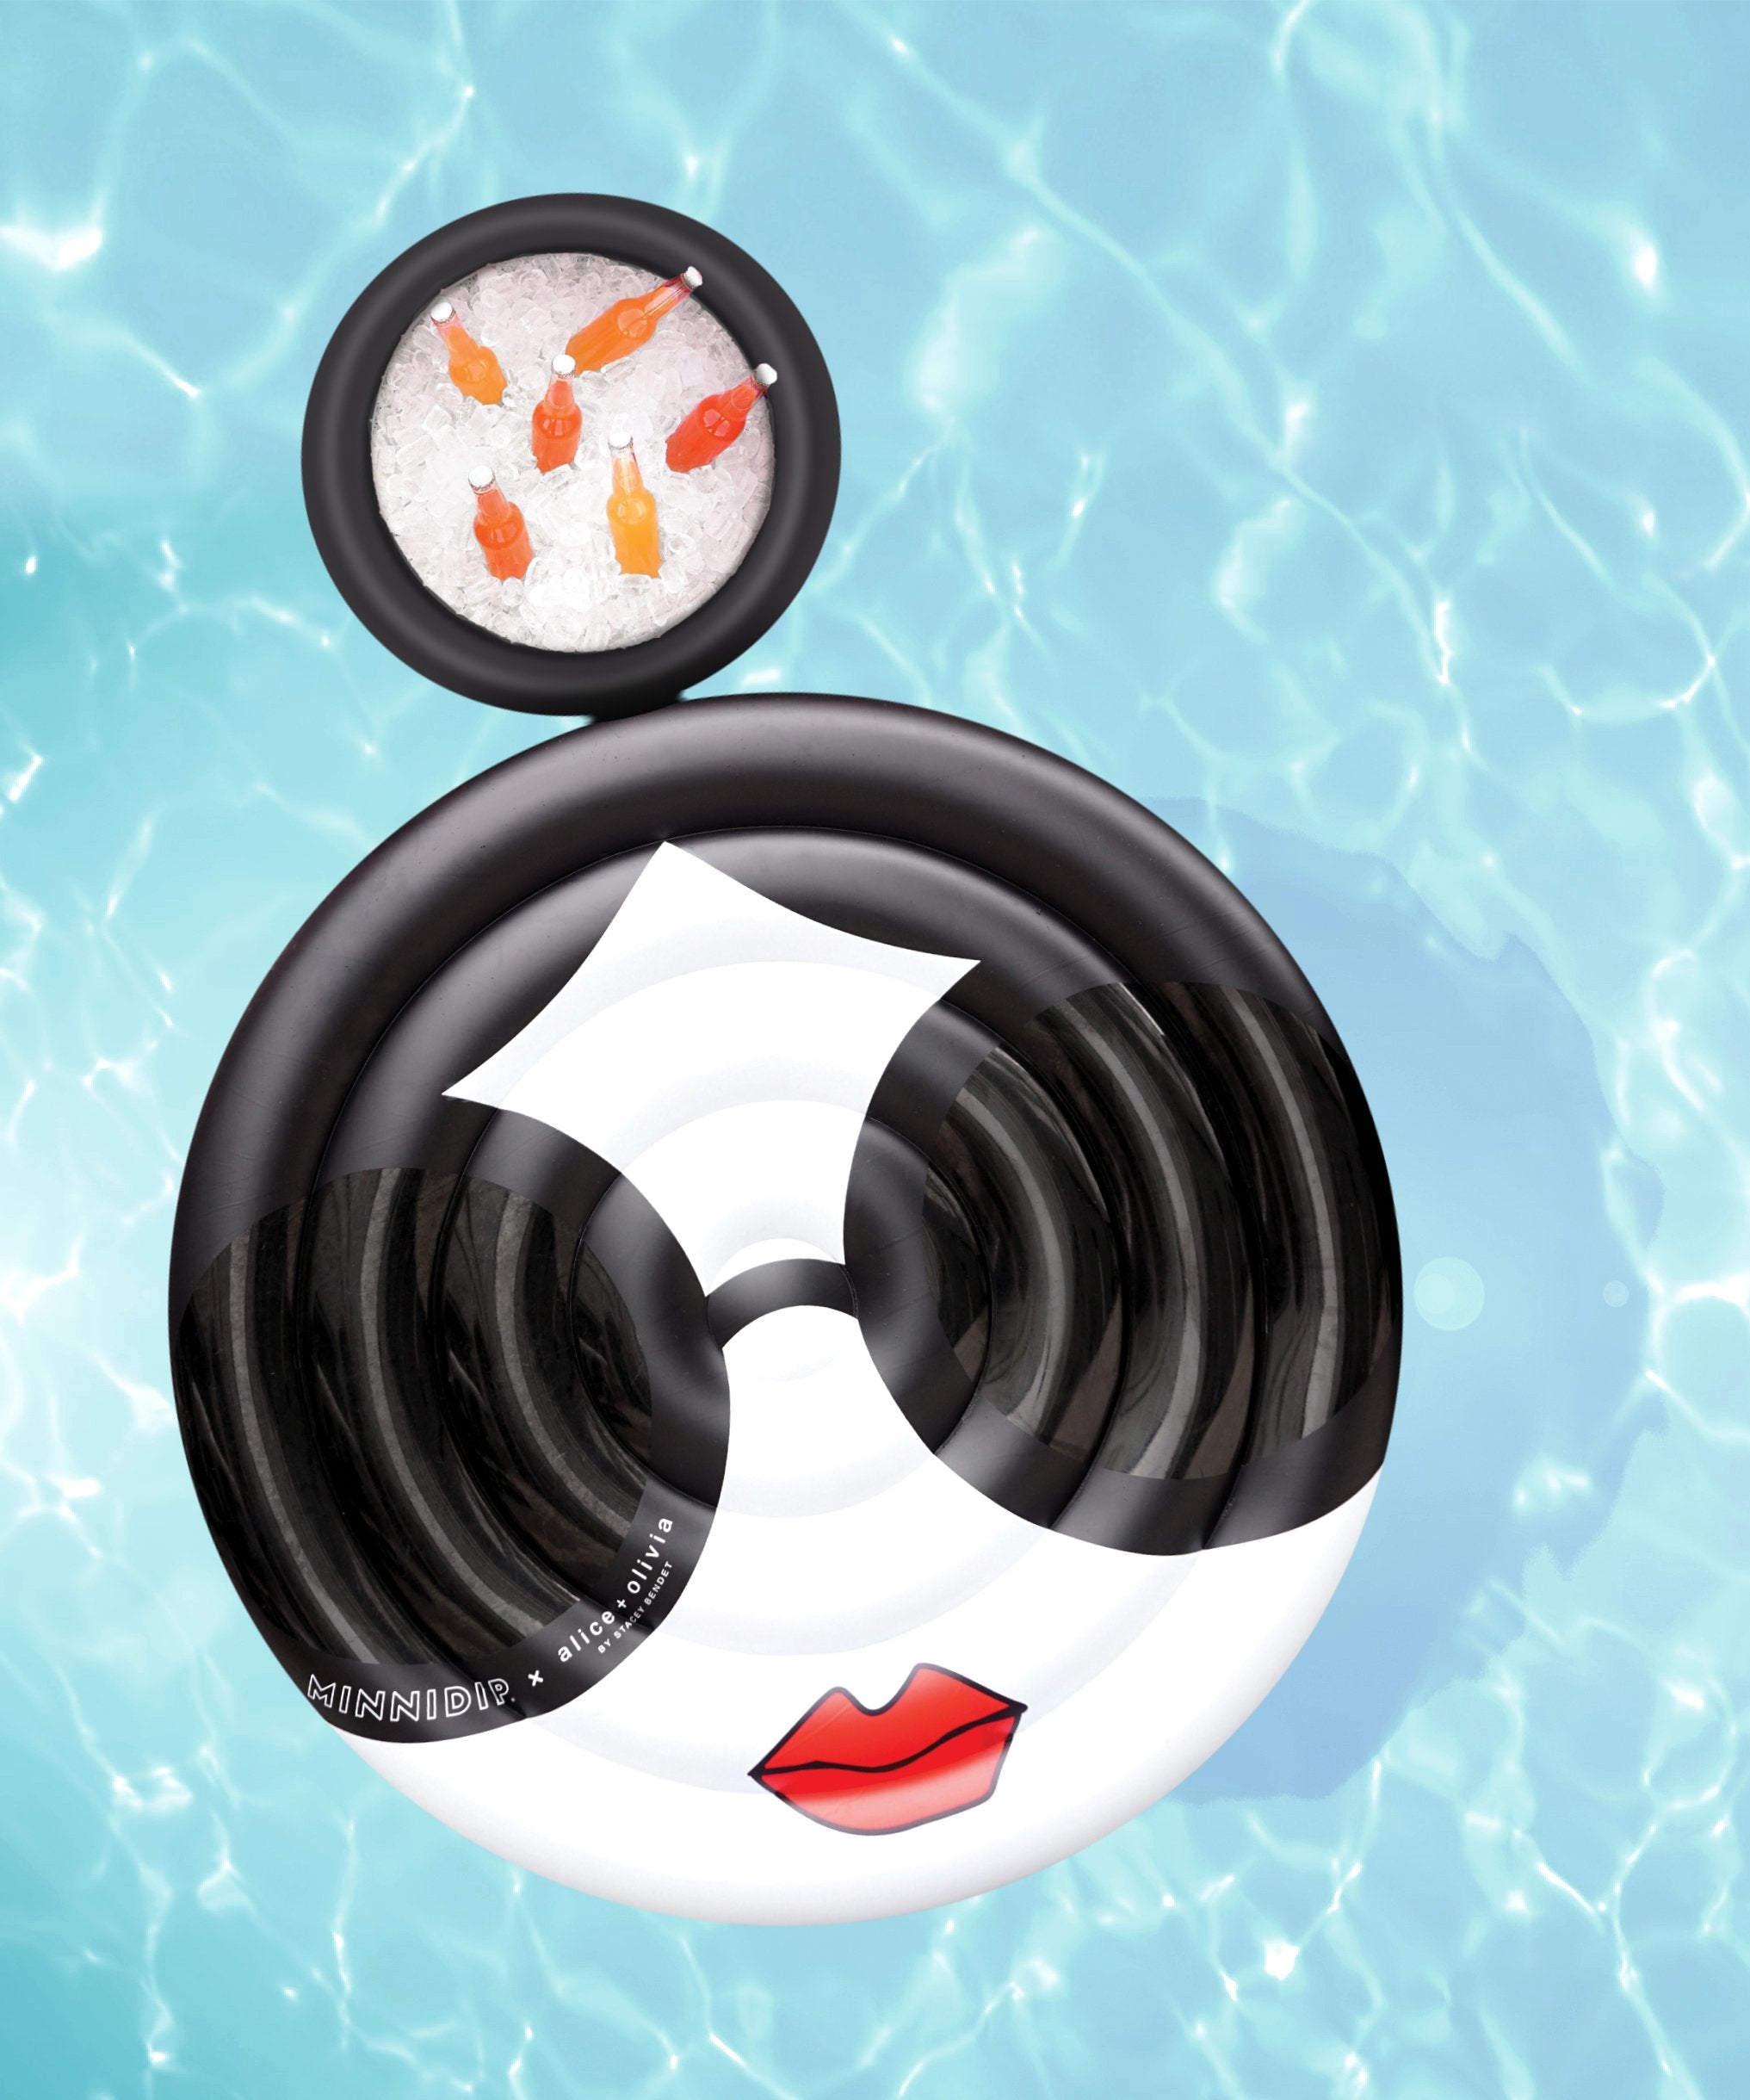 the MINNIDIP x ALICE + OLIVIA Round Float with Cooler